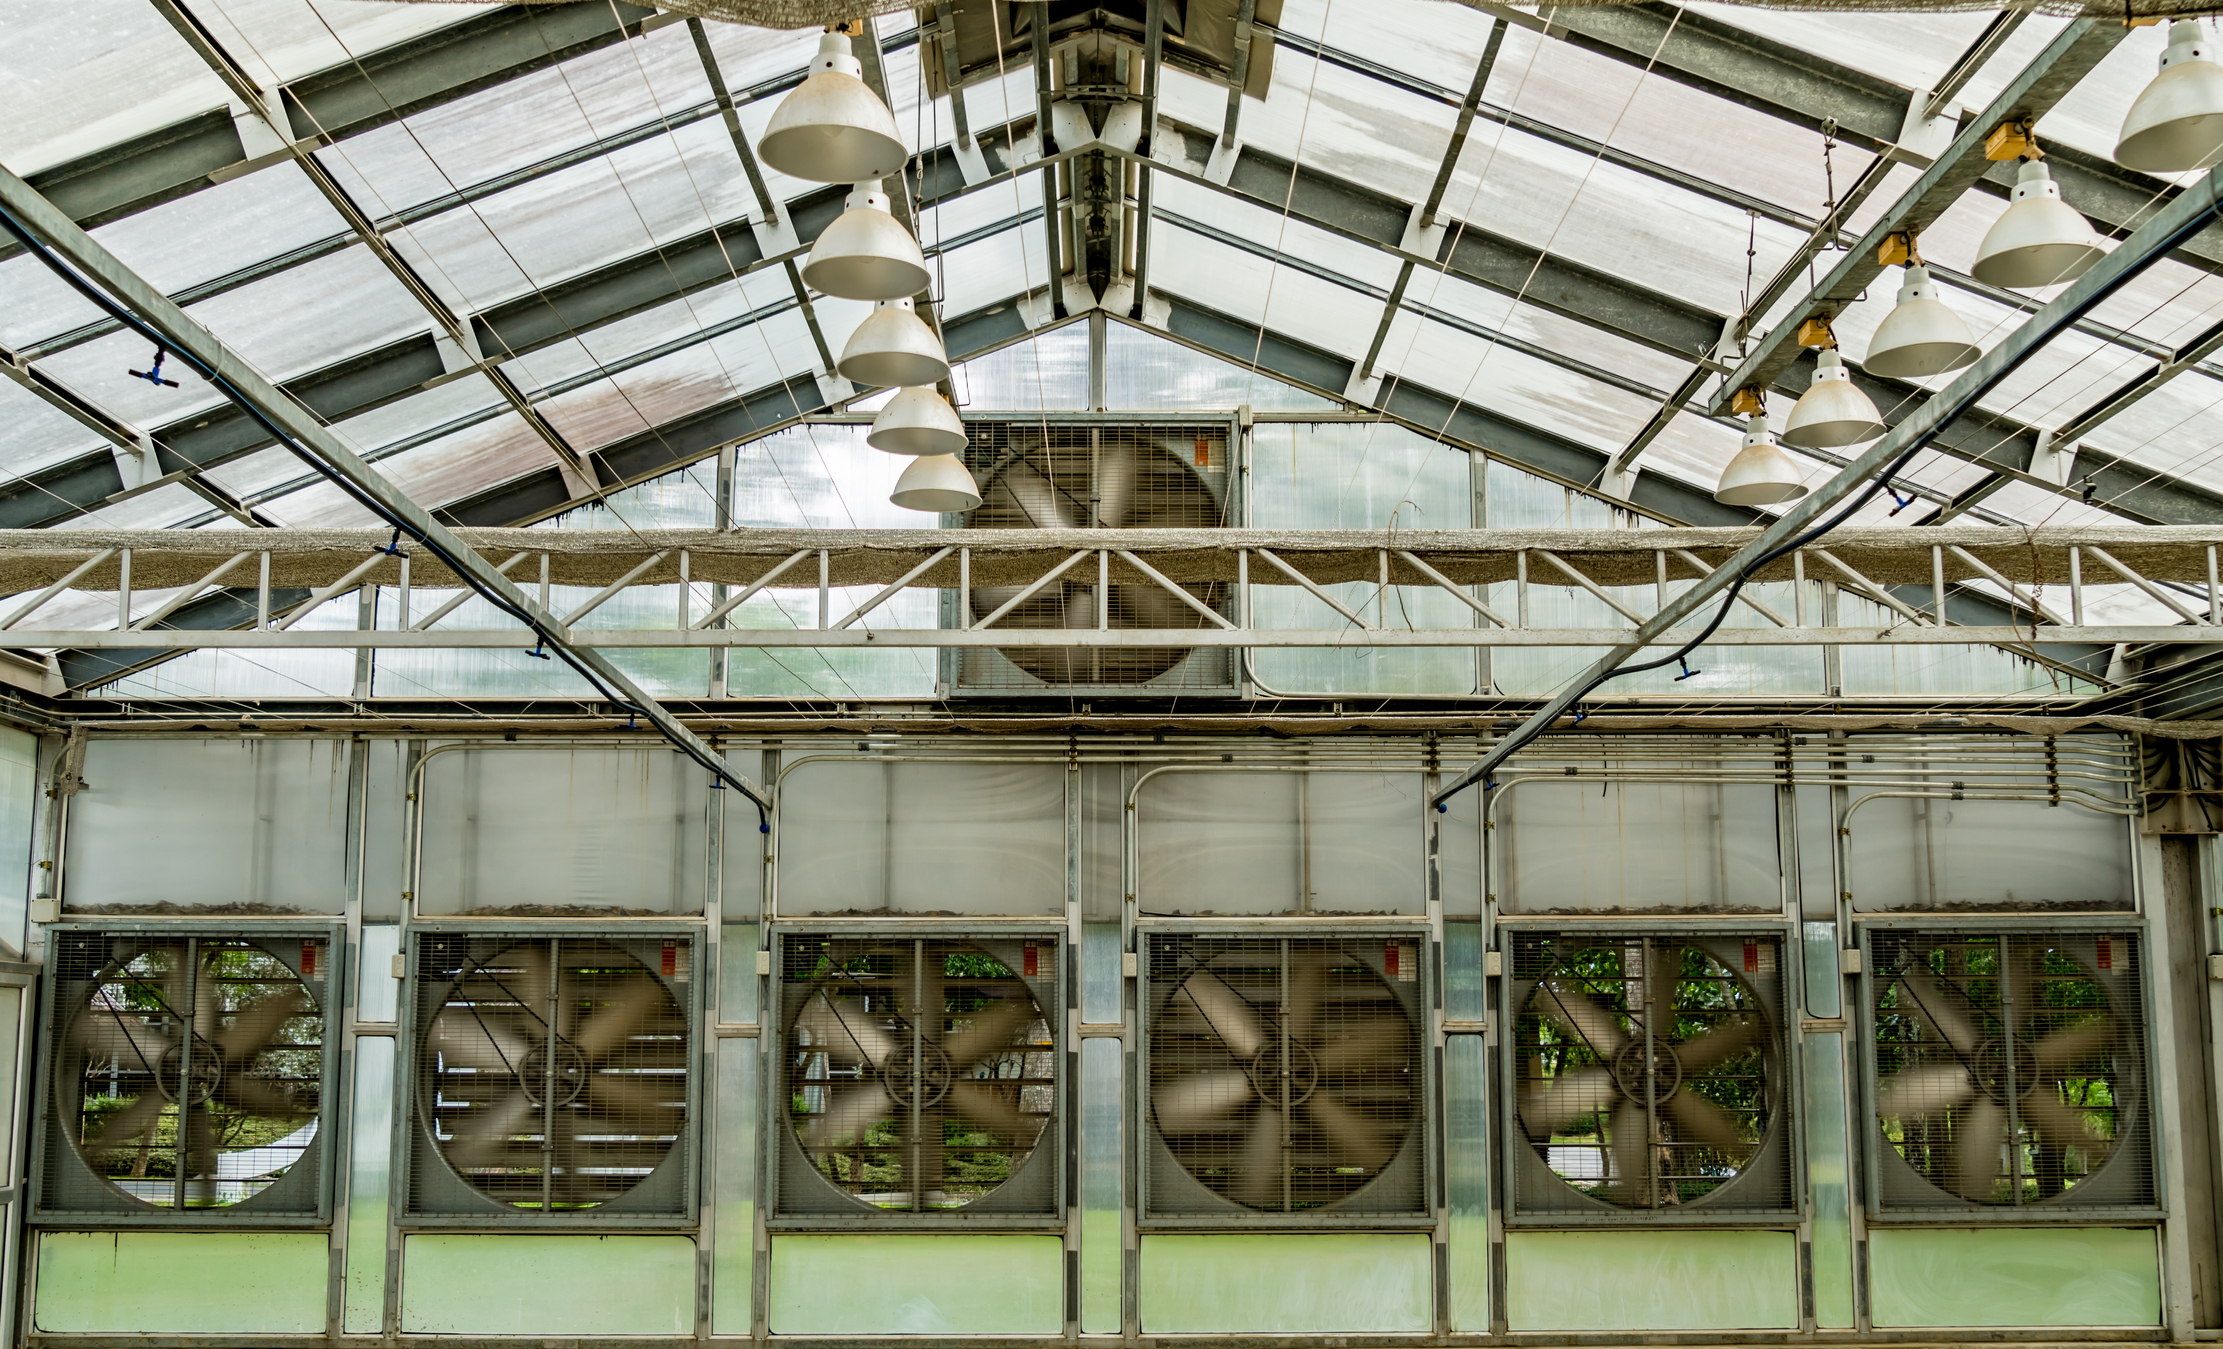 The interior of a greenhouse